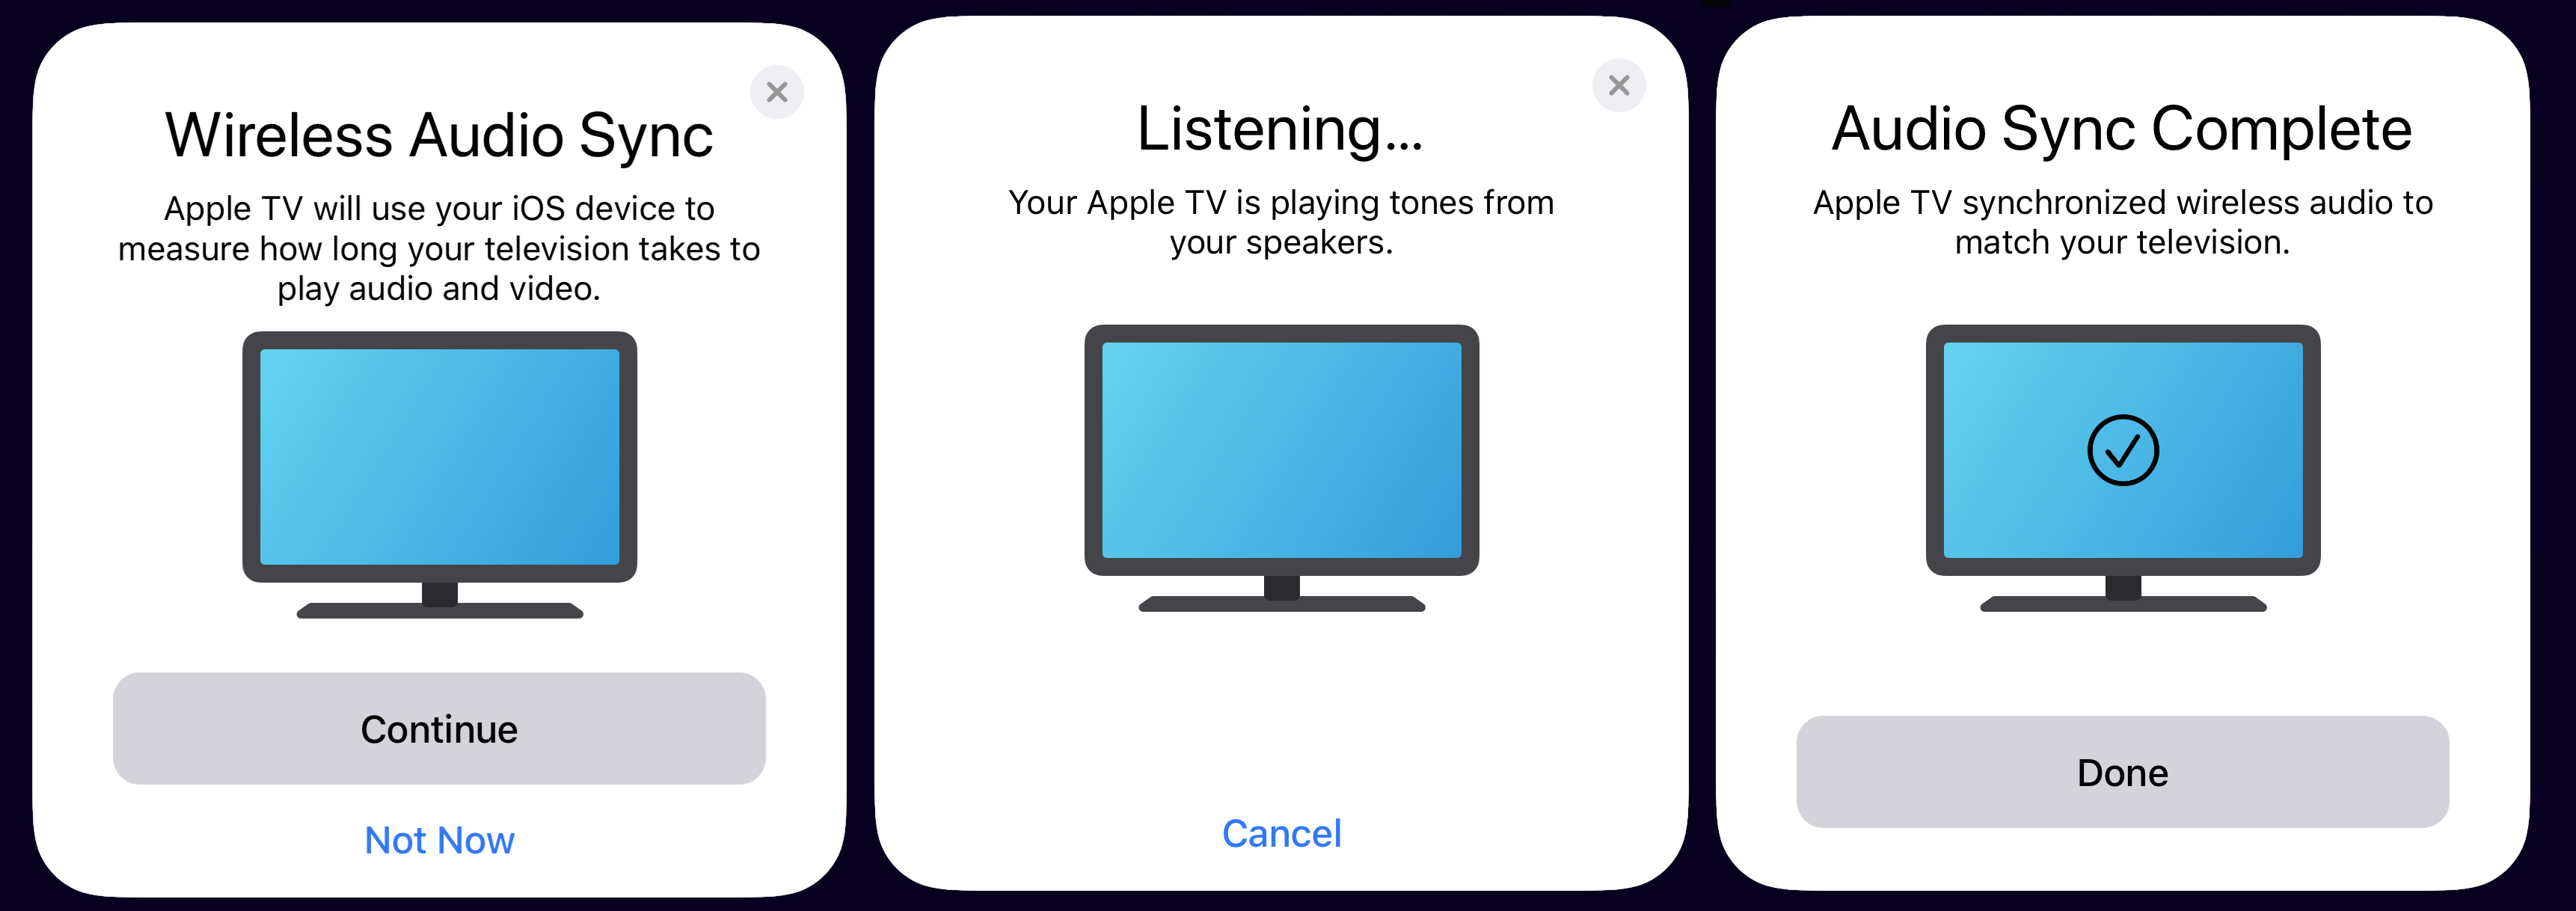 iOS 13 your iPhone to fix Apple TV audio sync issues - 9to5Mac